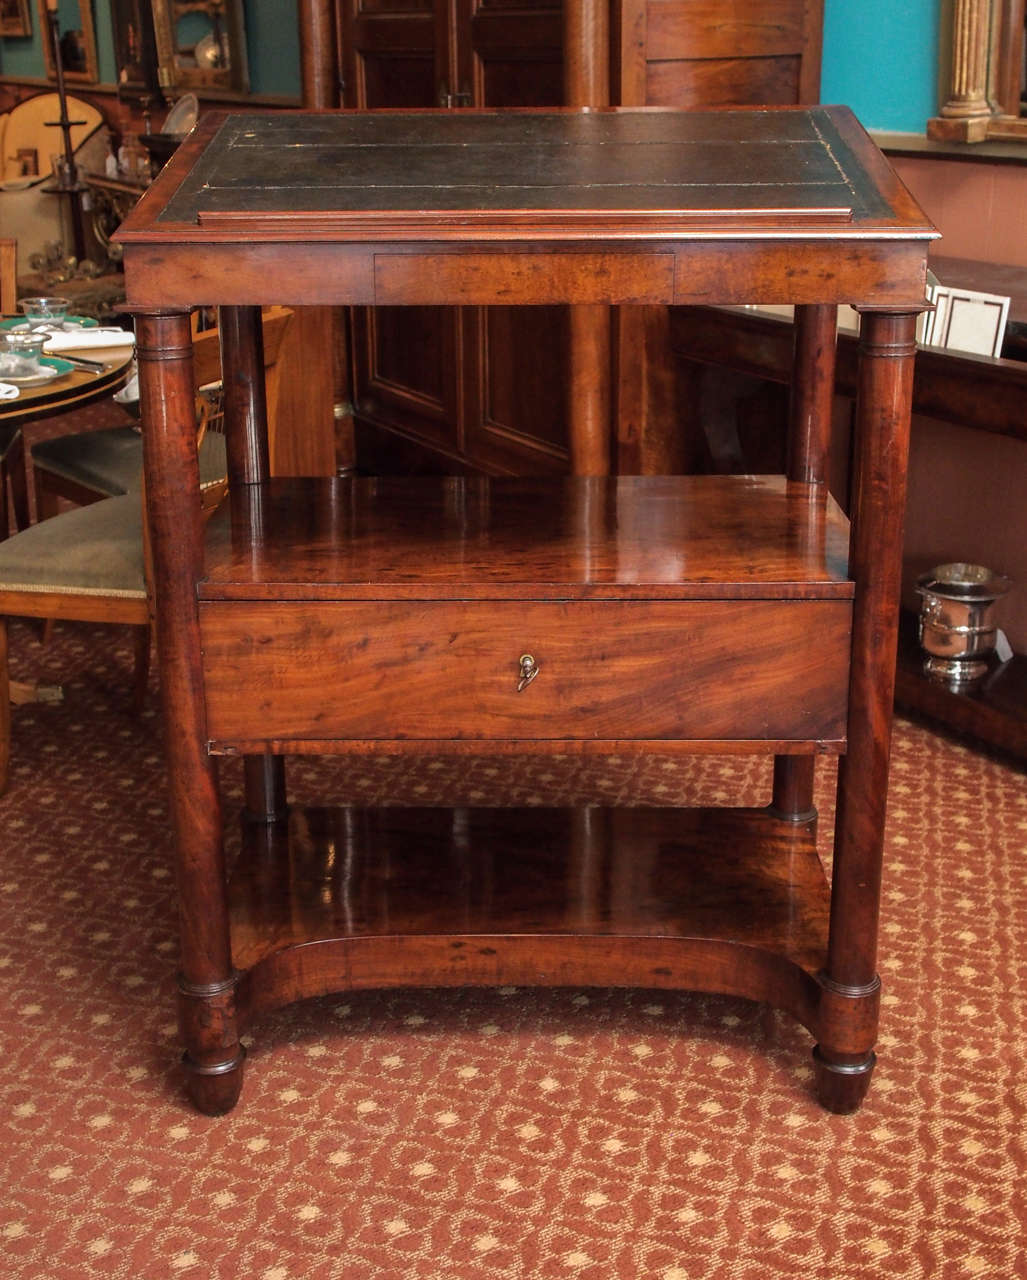 Early 19th century French Empire period mahogany gentleman's library stand/ desk, with leather top, centre and side drawers, and candle slide, circa 1810.